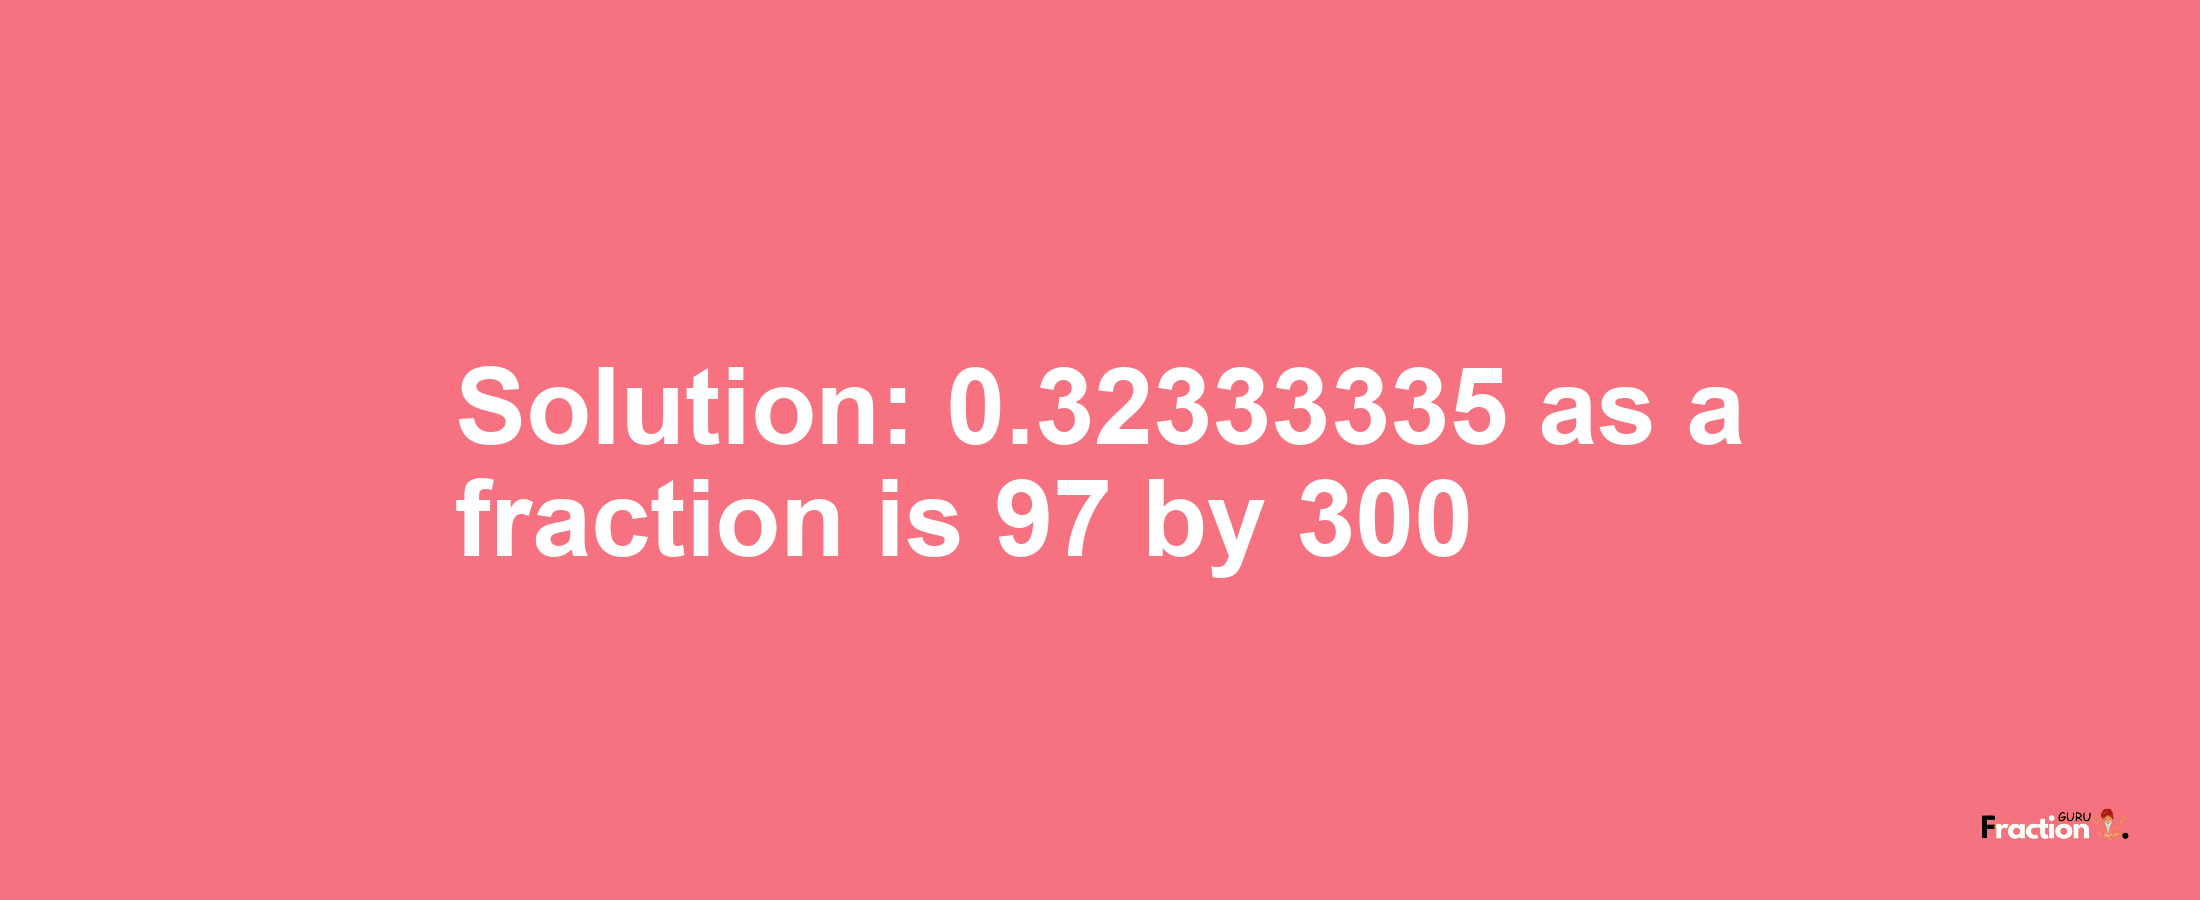 Solution:0.32333335 as a fraction is 97/300